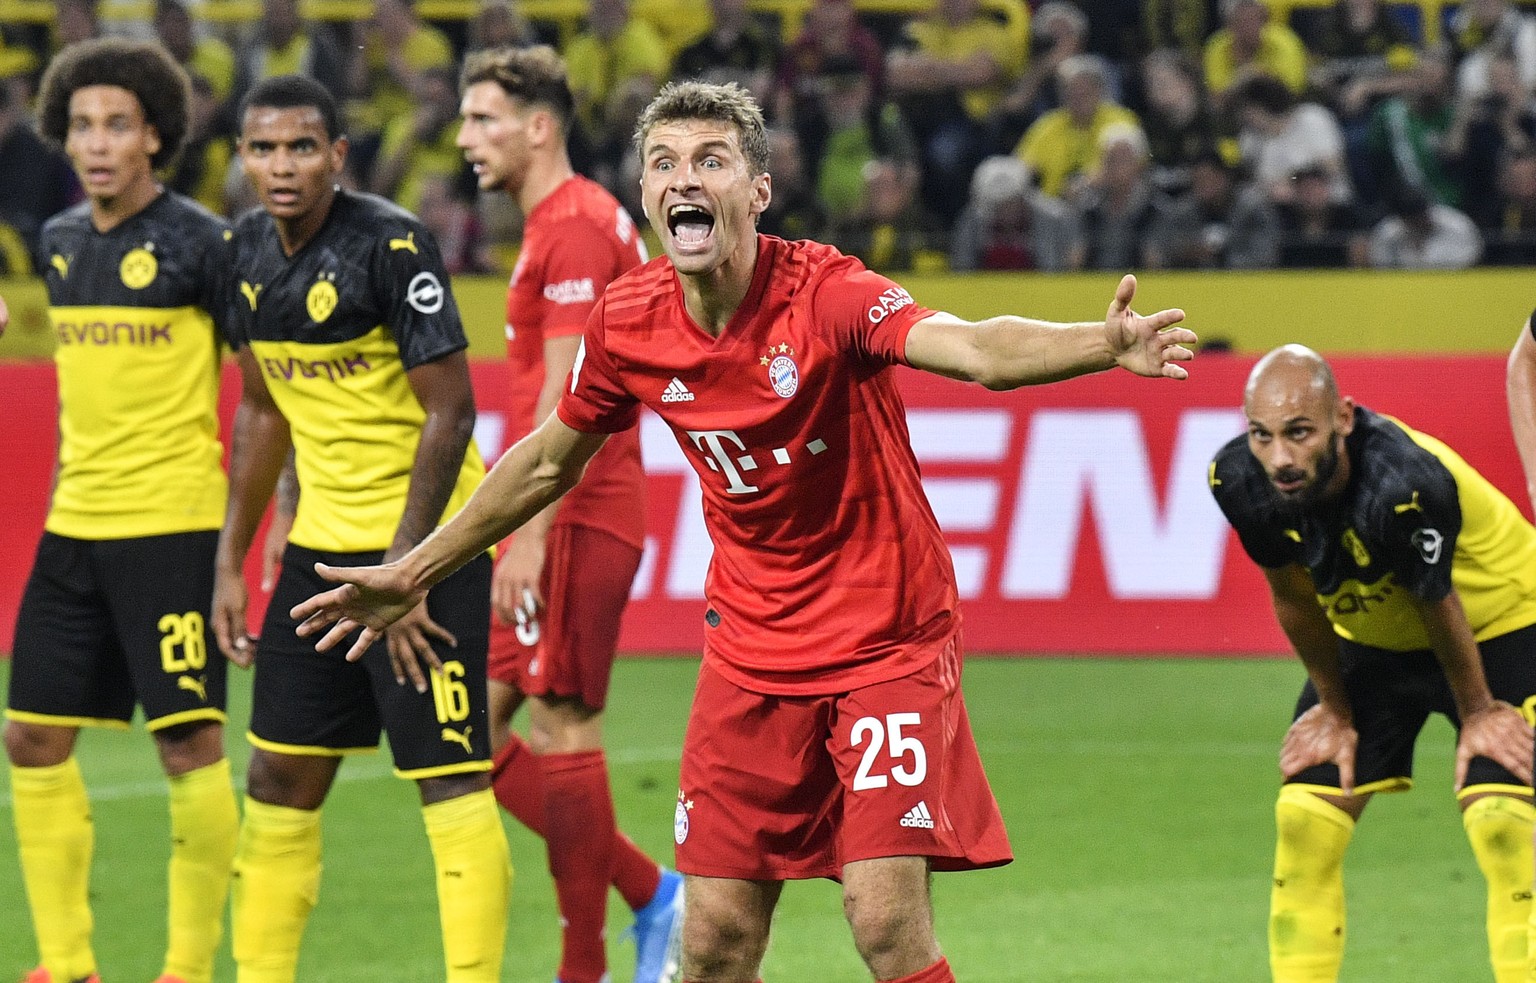 Bayern&#039;s Thomas Mueller reacts during the German Super Cup soccer match between Borussia Dortmund and Bayern Munich in Dortmund, Germany, Saturday, Aug. 3, 2019. (AP Photo/Martin Meissner)